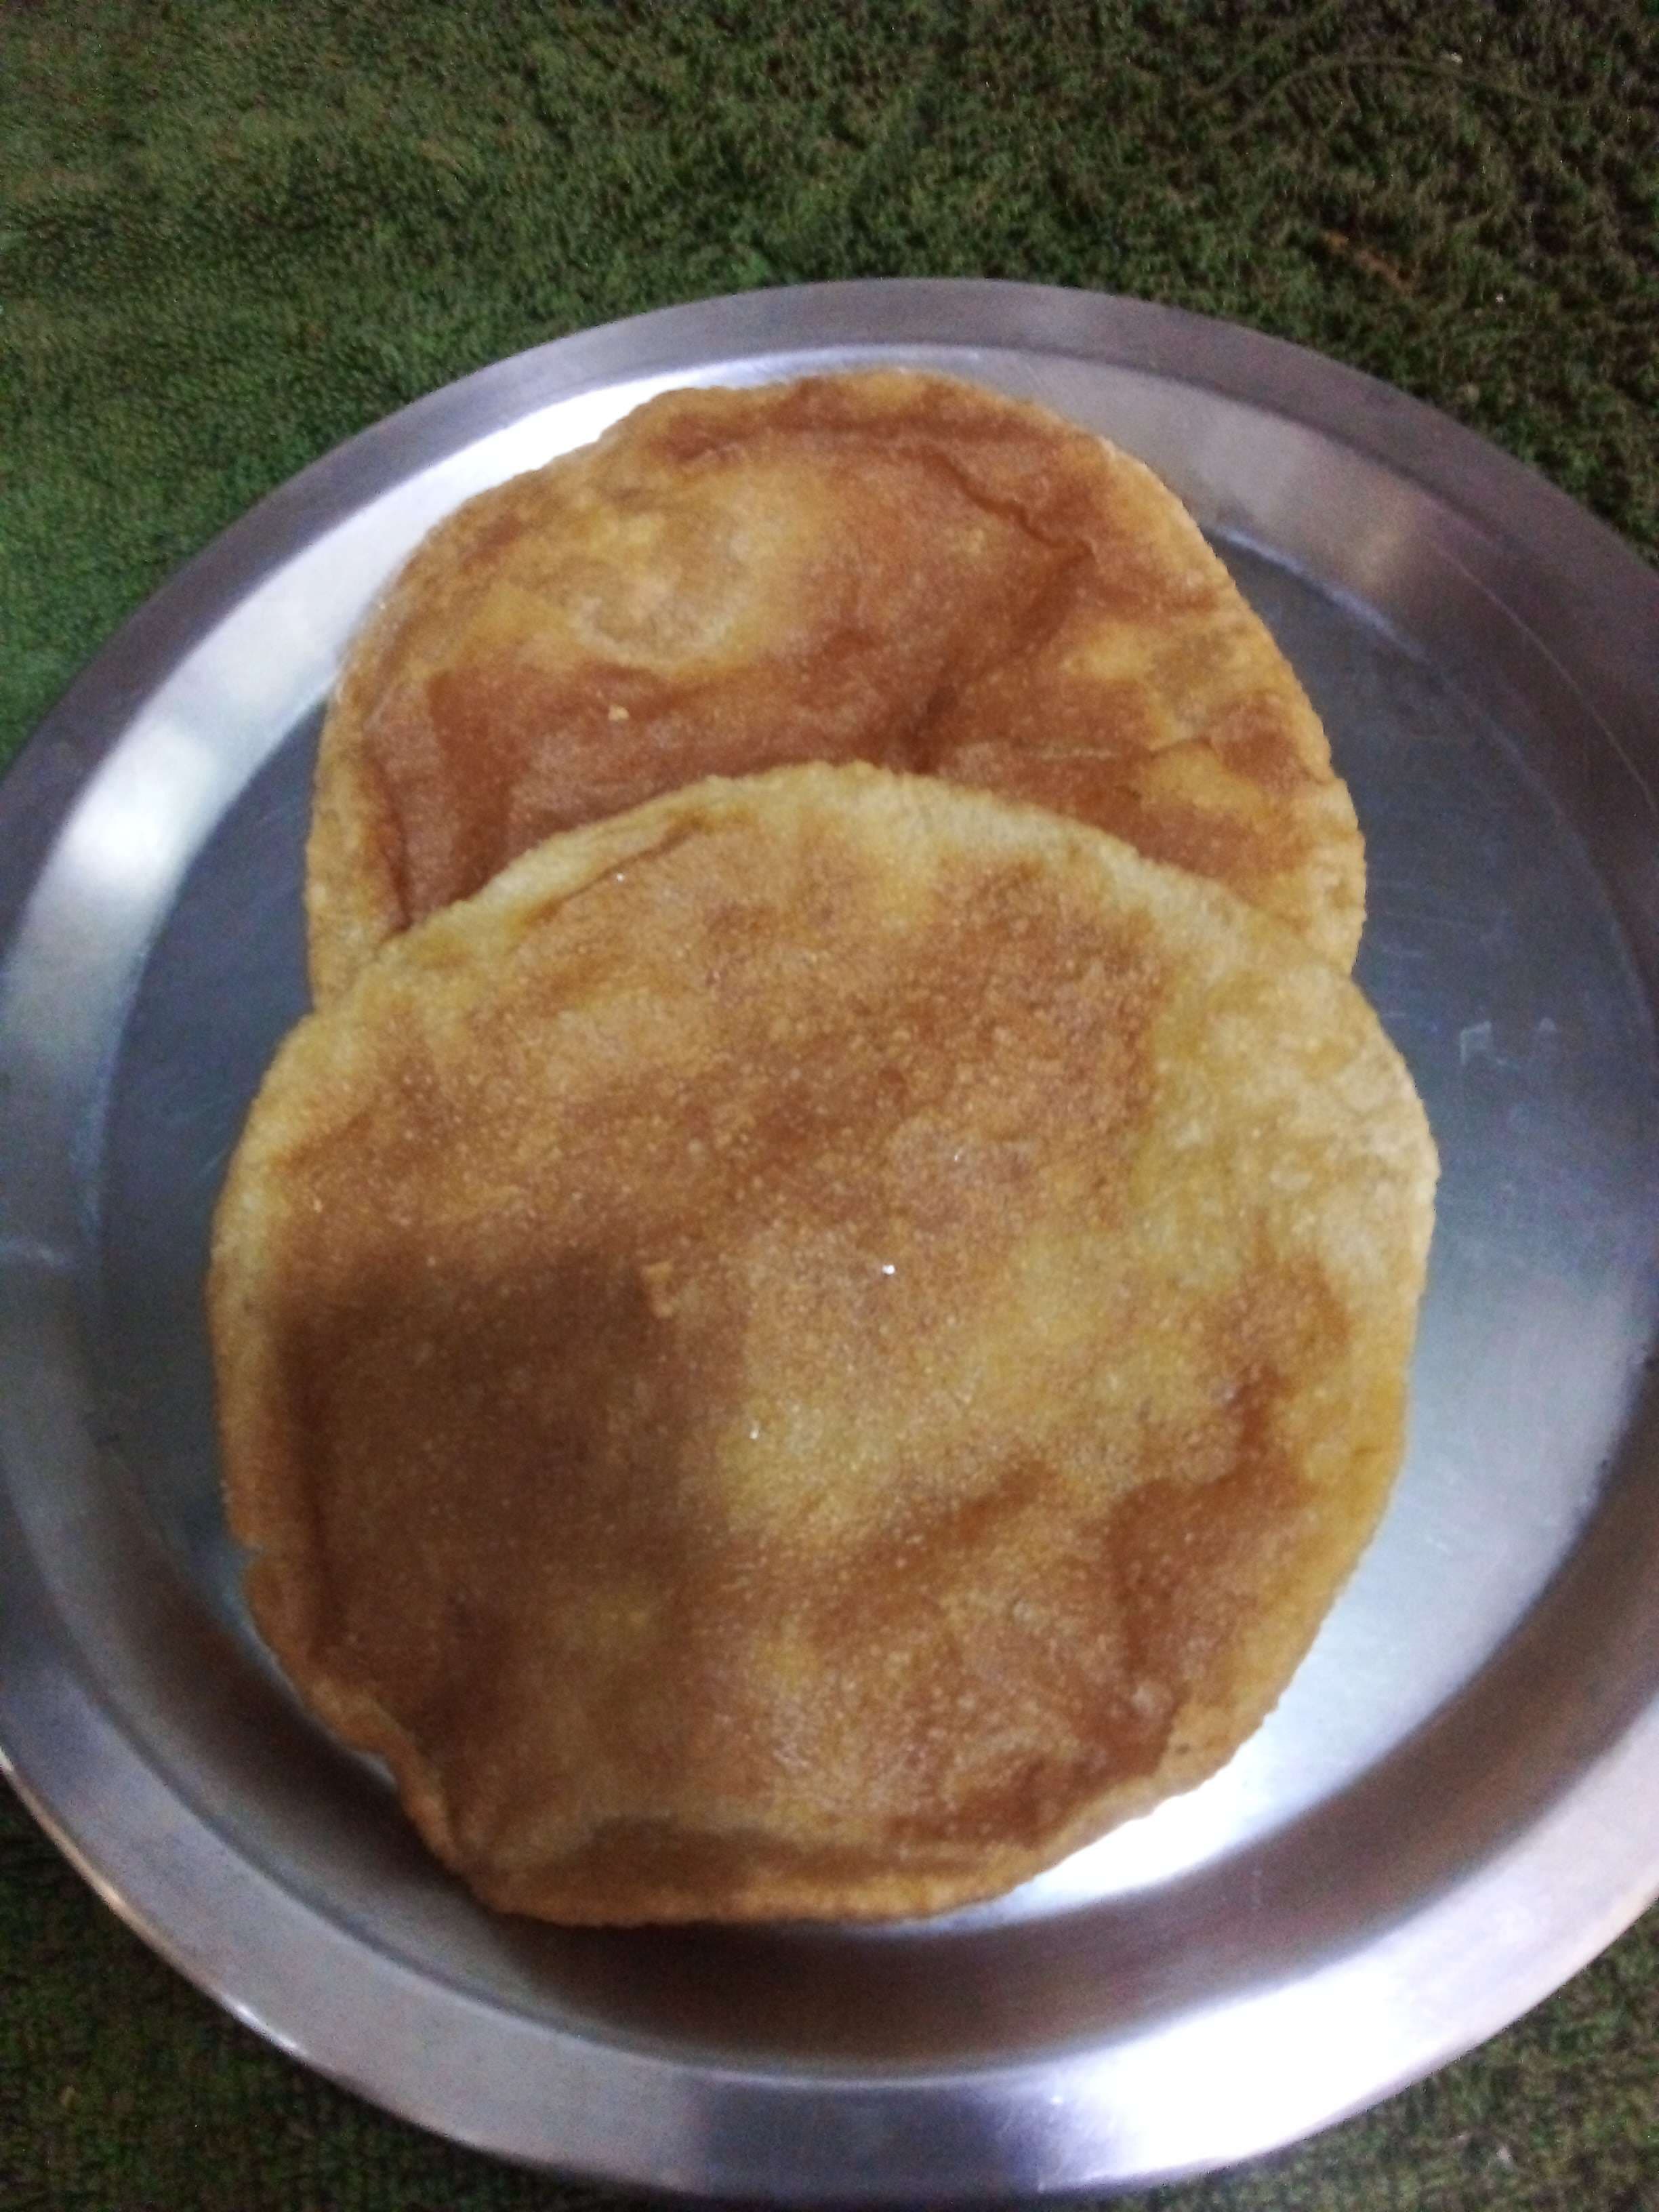 Tasty Pooris & Bedmis cooked by COOX chefs cooks during occasions parties events at home